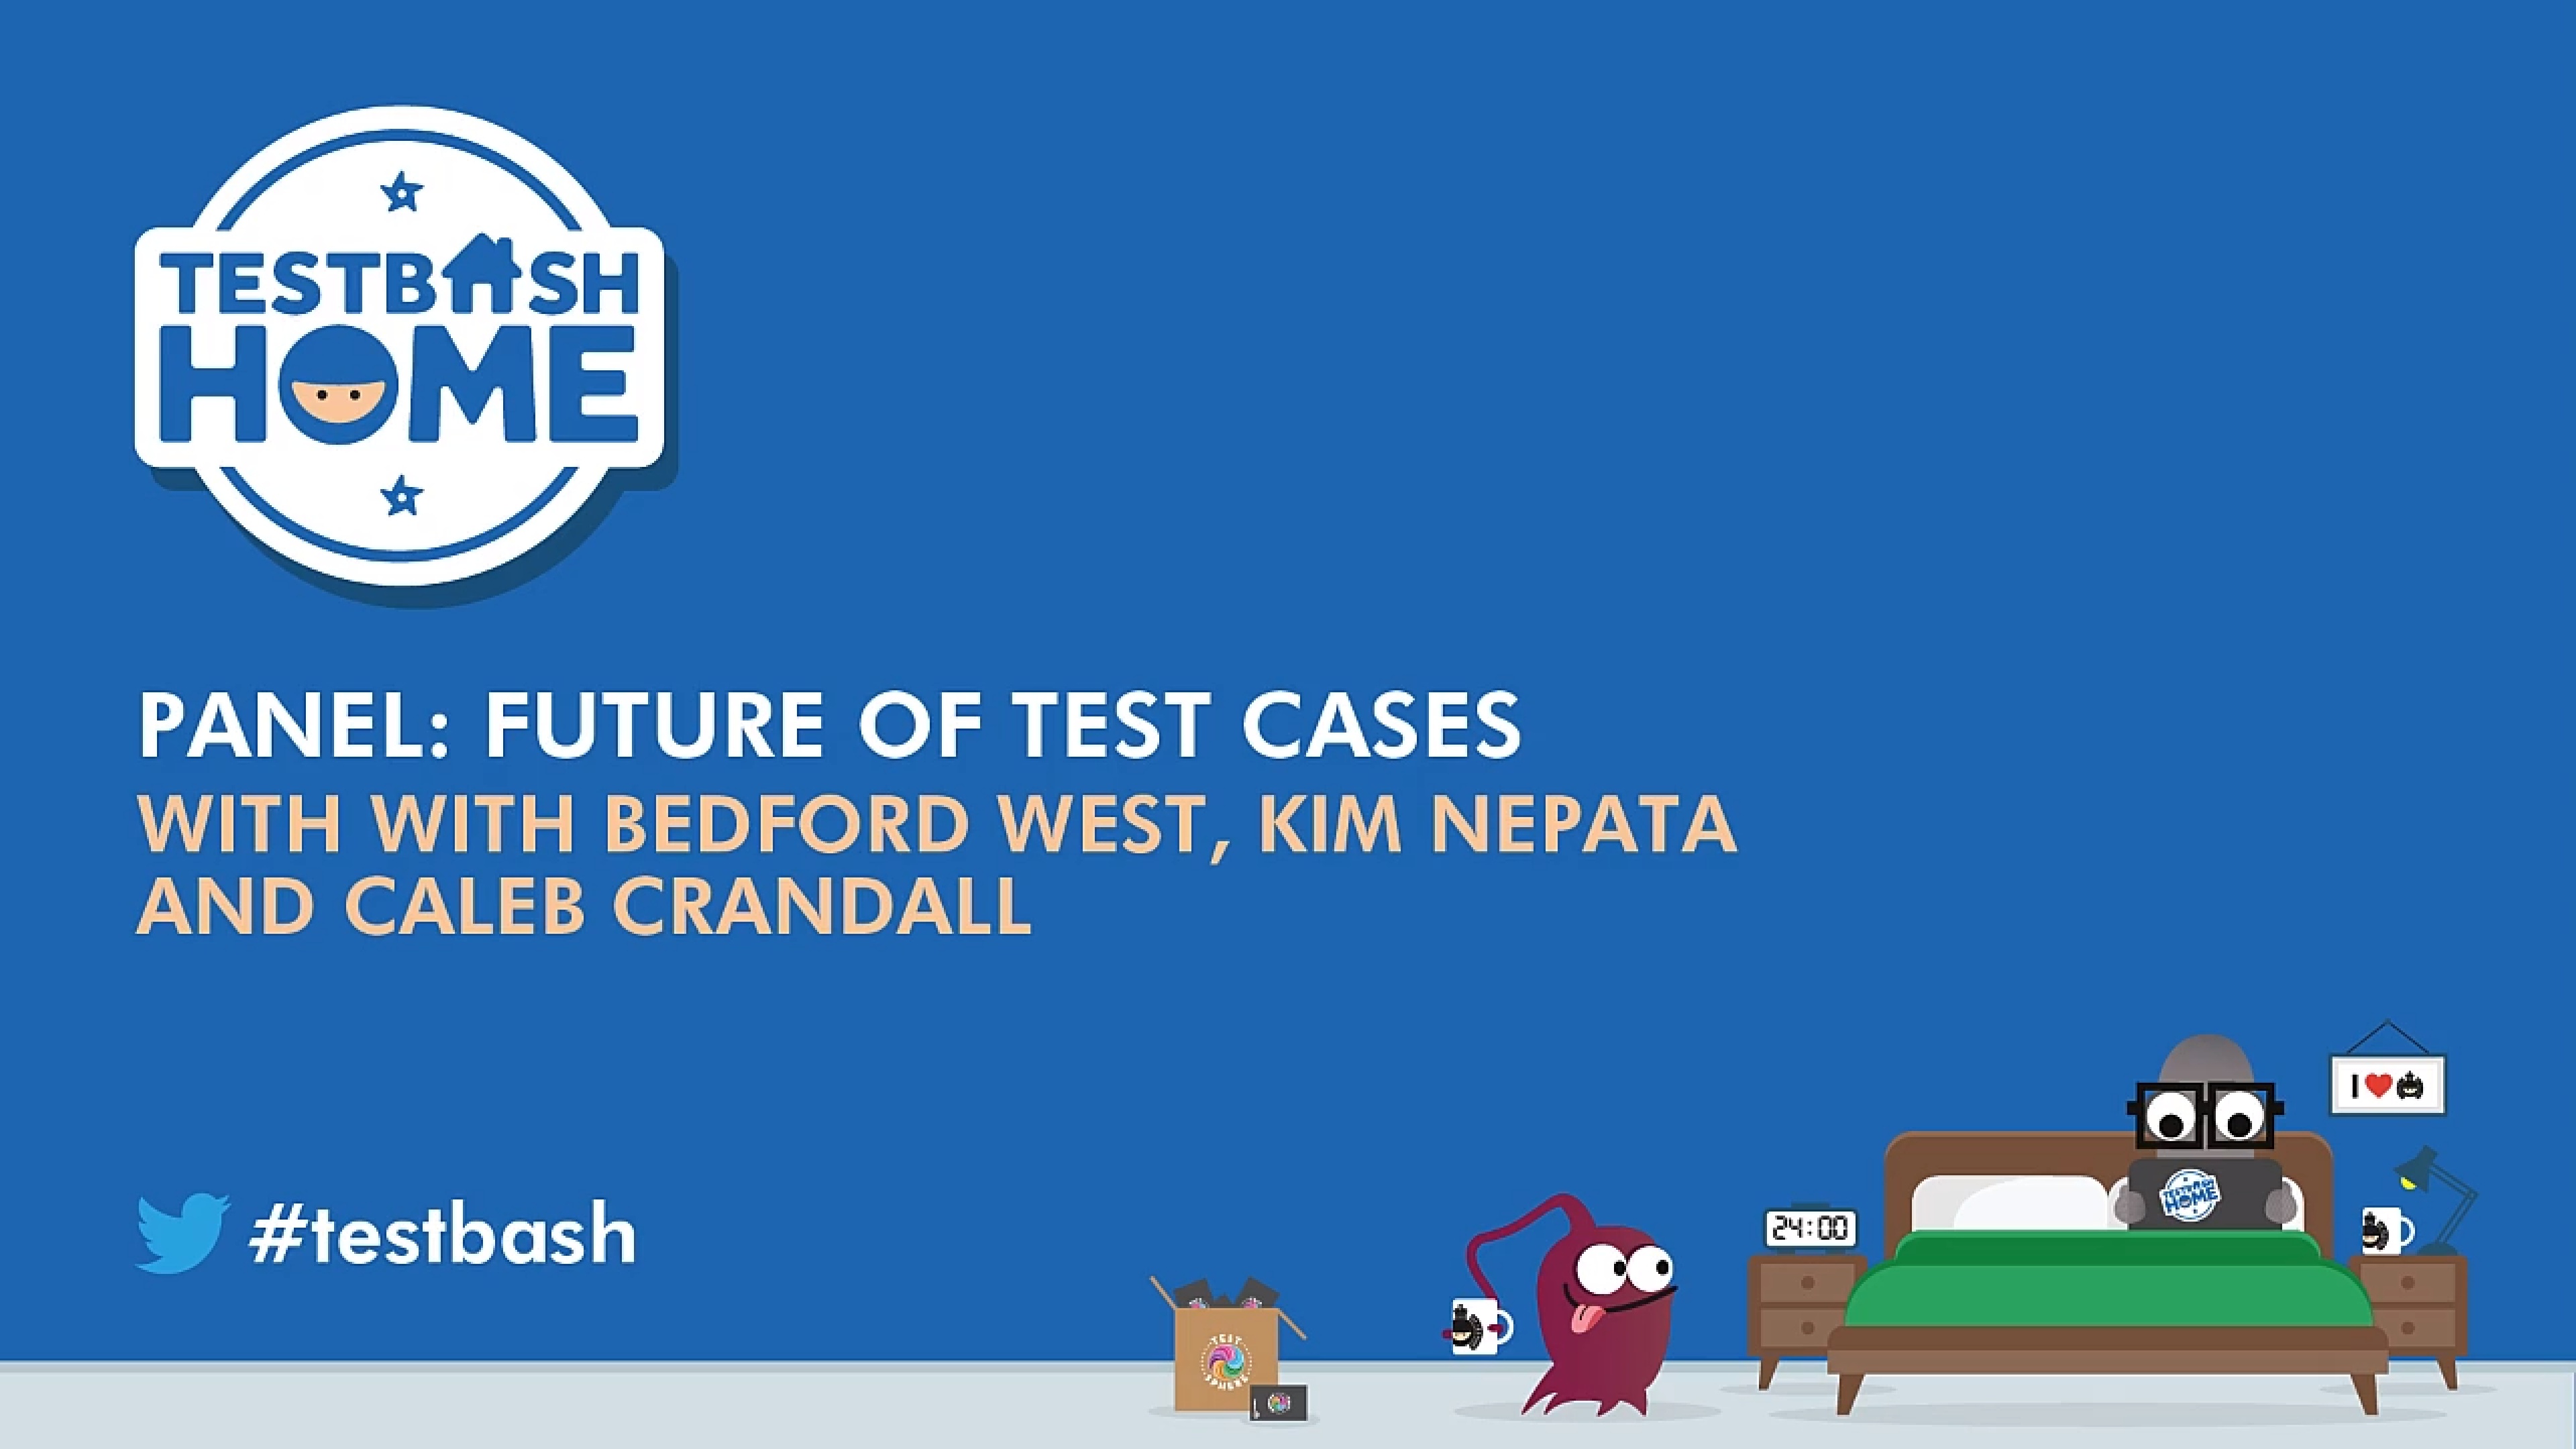 Discussion - The Future of Test Cases